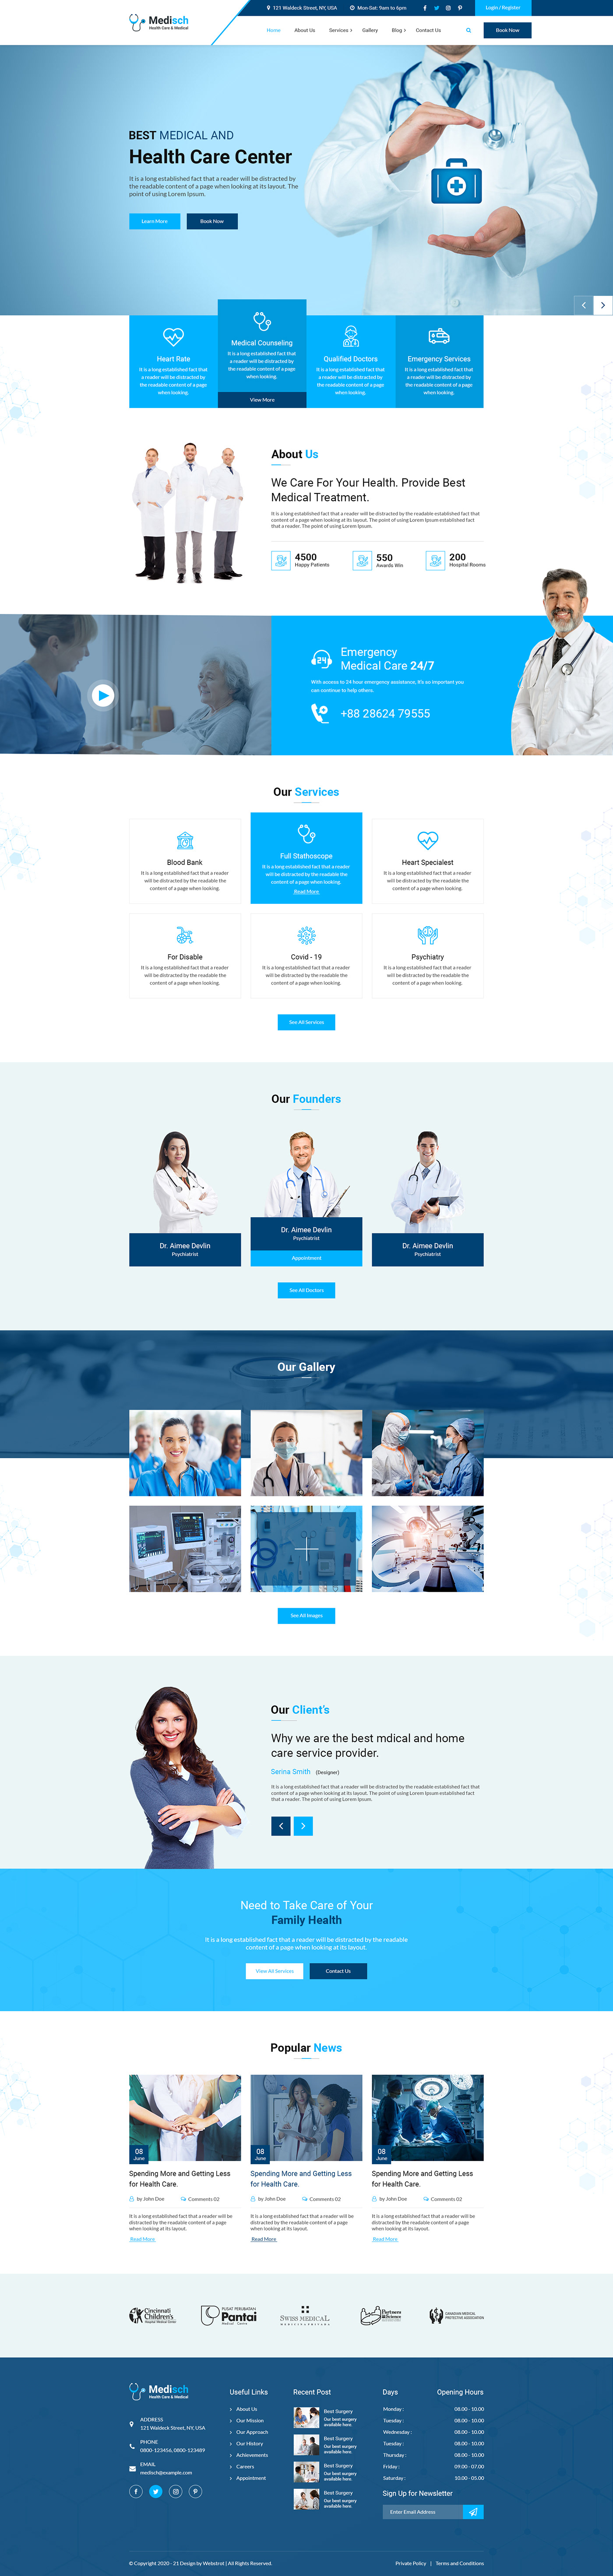 #appointmentbooking #appointmentpsd #appointmentscheduling #bookingmanagement #Clinicappointment #doctorfinder #doctormanagement #doctorsbookingtemplate #healthcare #hospitalbooking